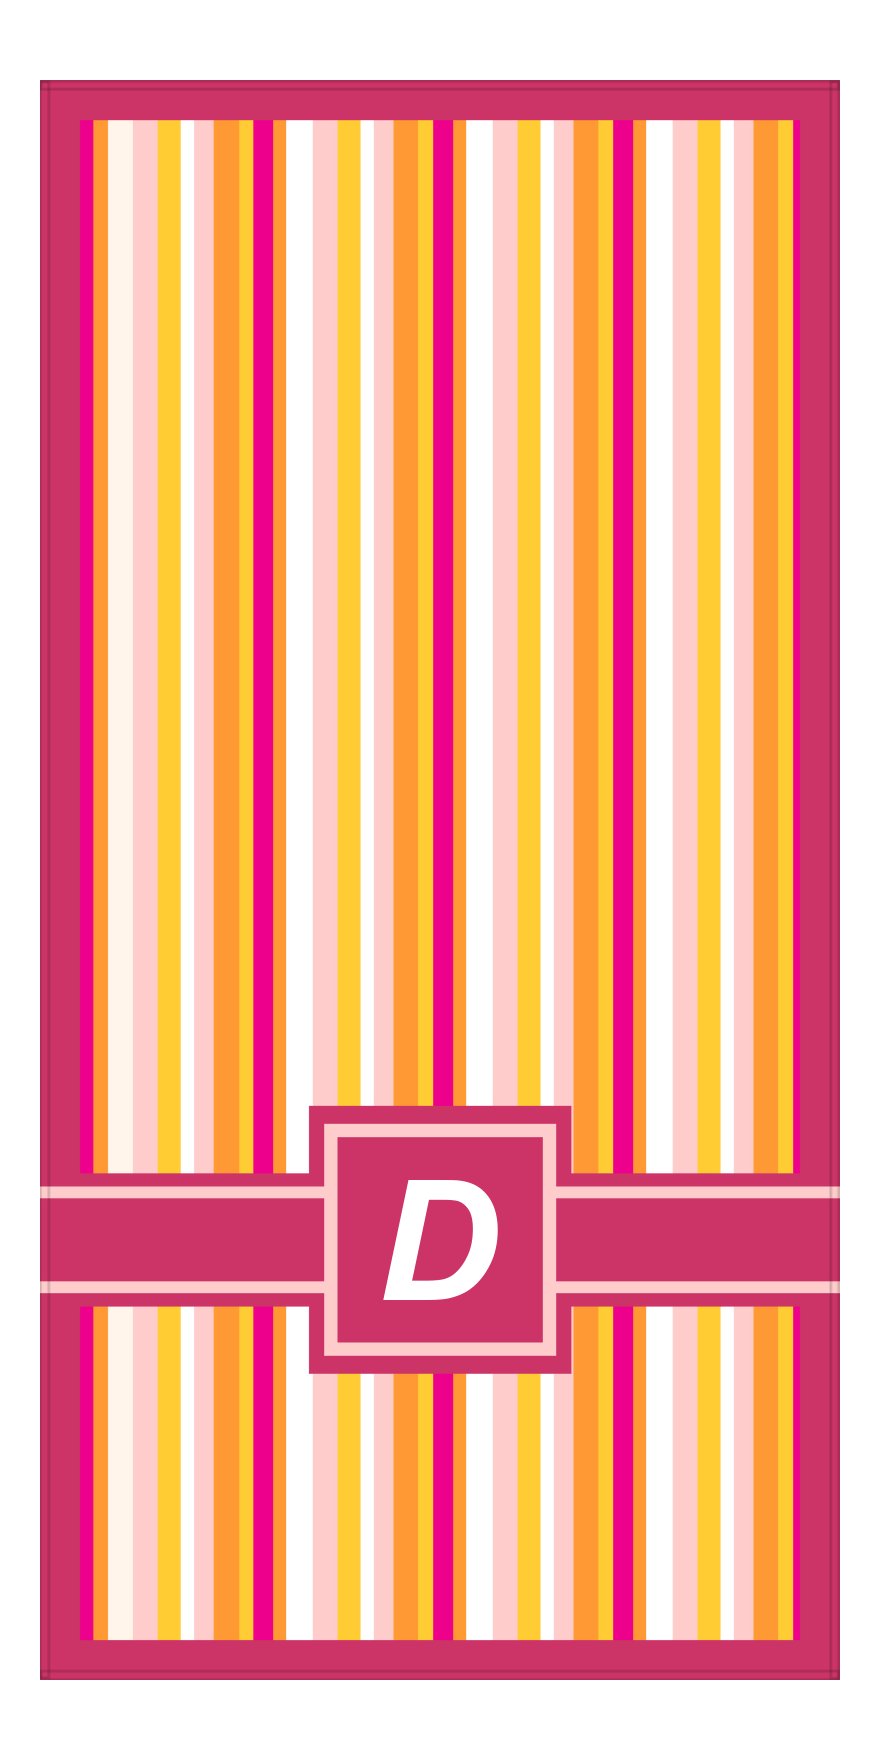 Personalized 5 Color Stripes 4 Repeat Beach Towel - Vertical - Pink and Orange - Square with Ribbon Off Center Frame - Front View